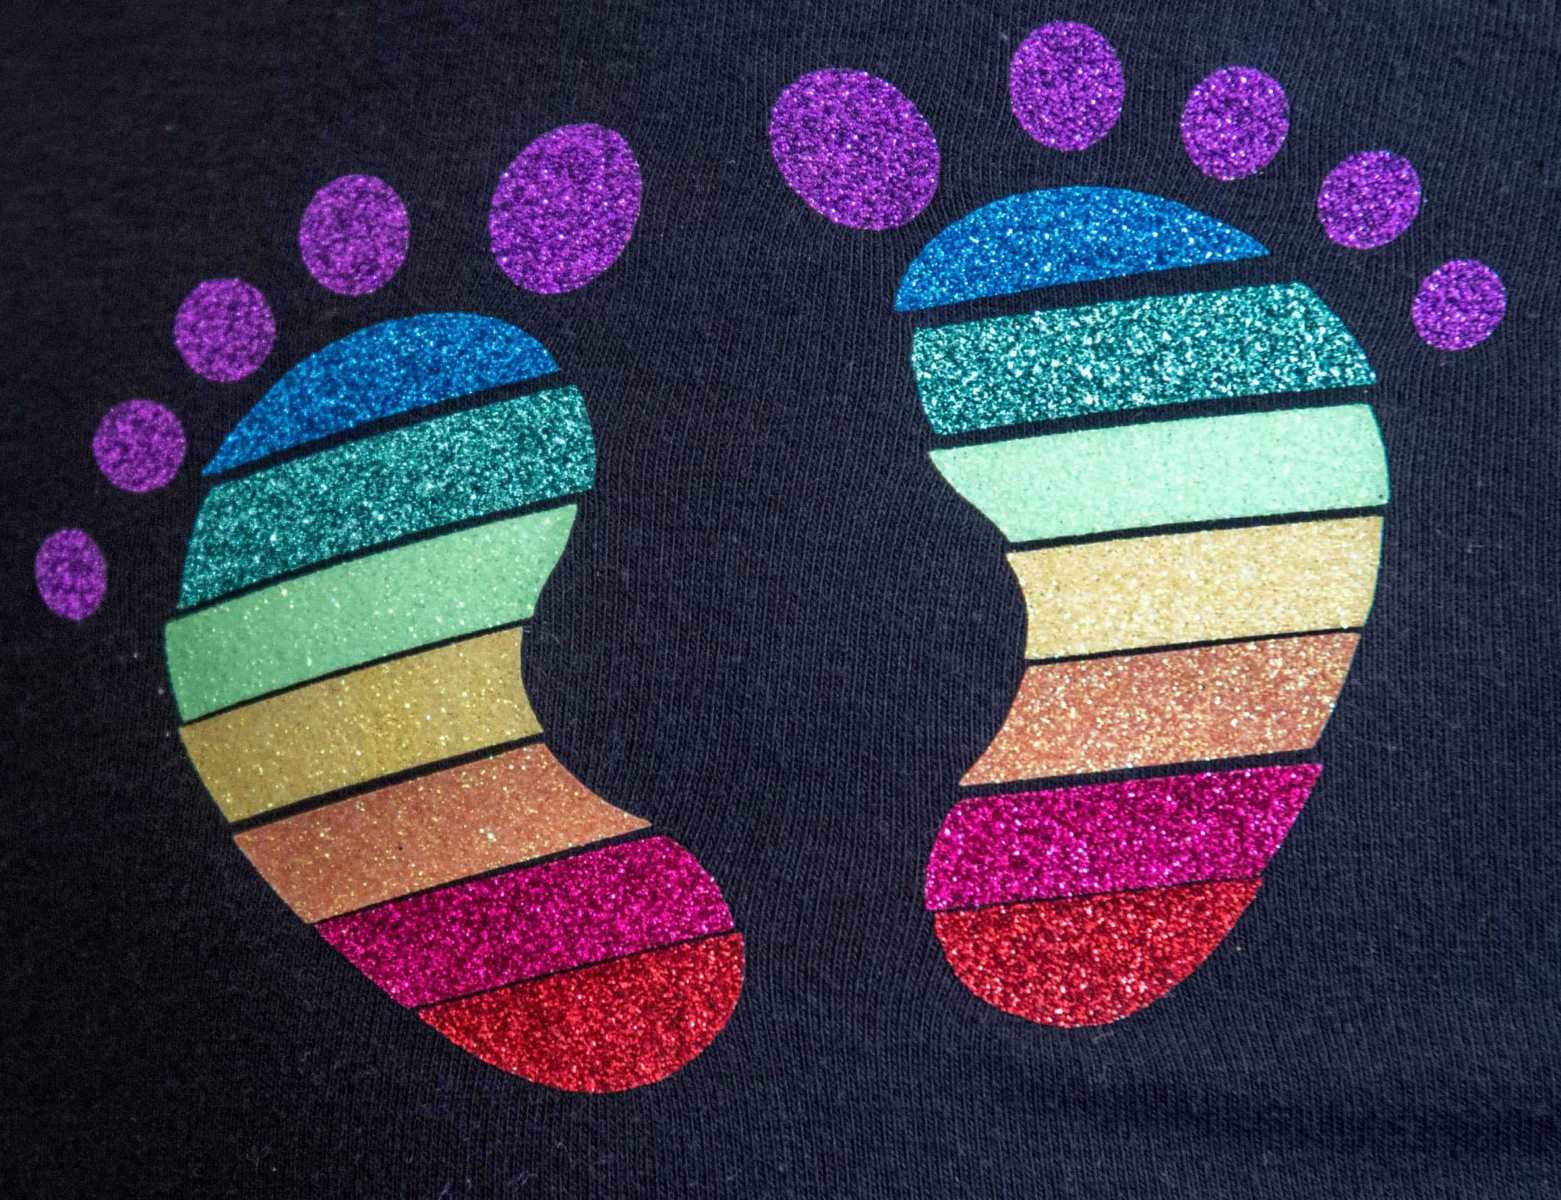 The Meaning And Origin Of 'Rainbow Babies'